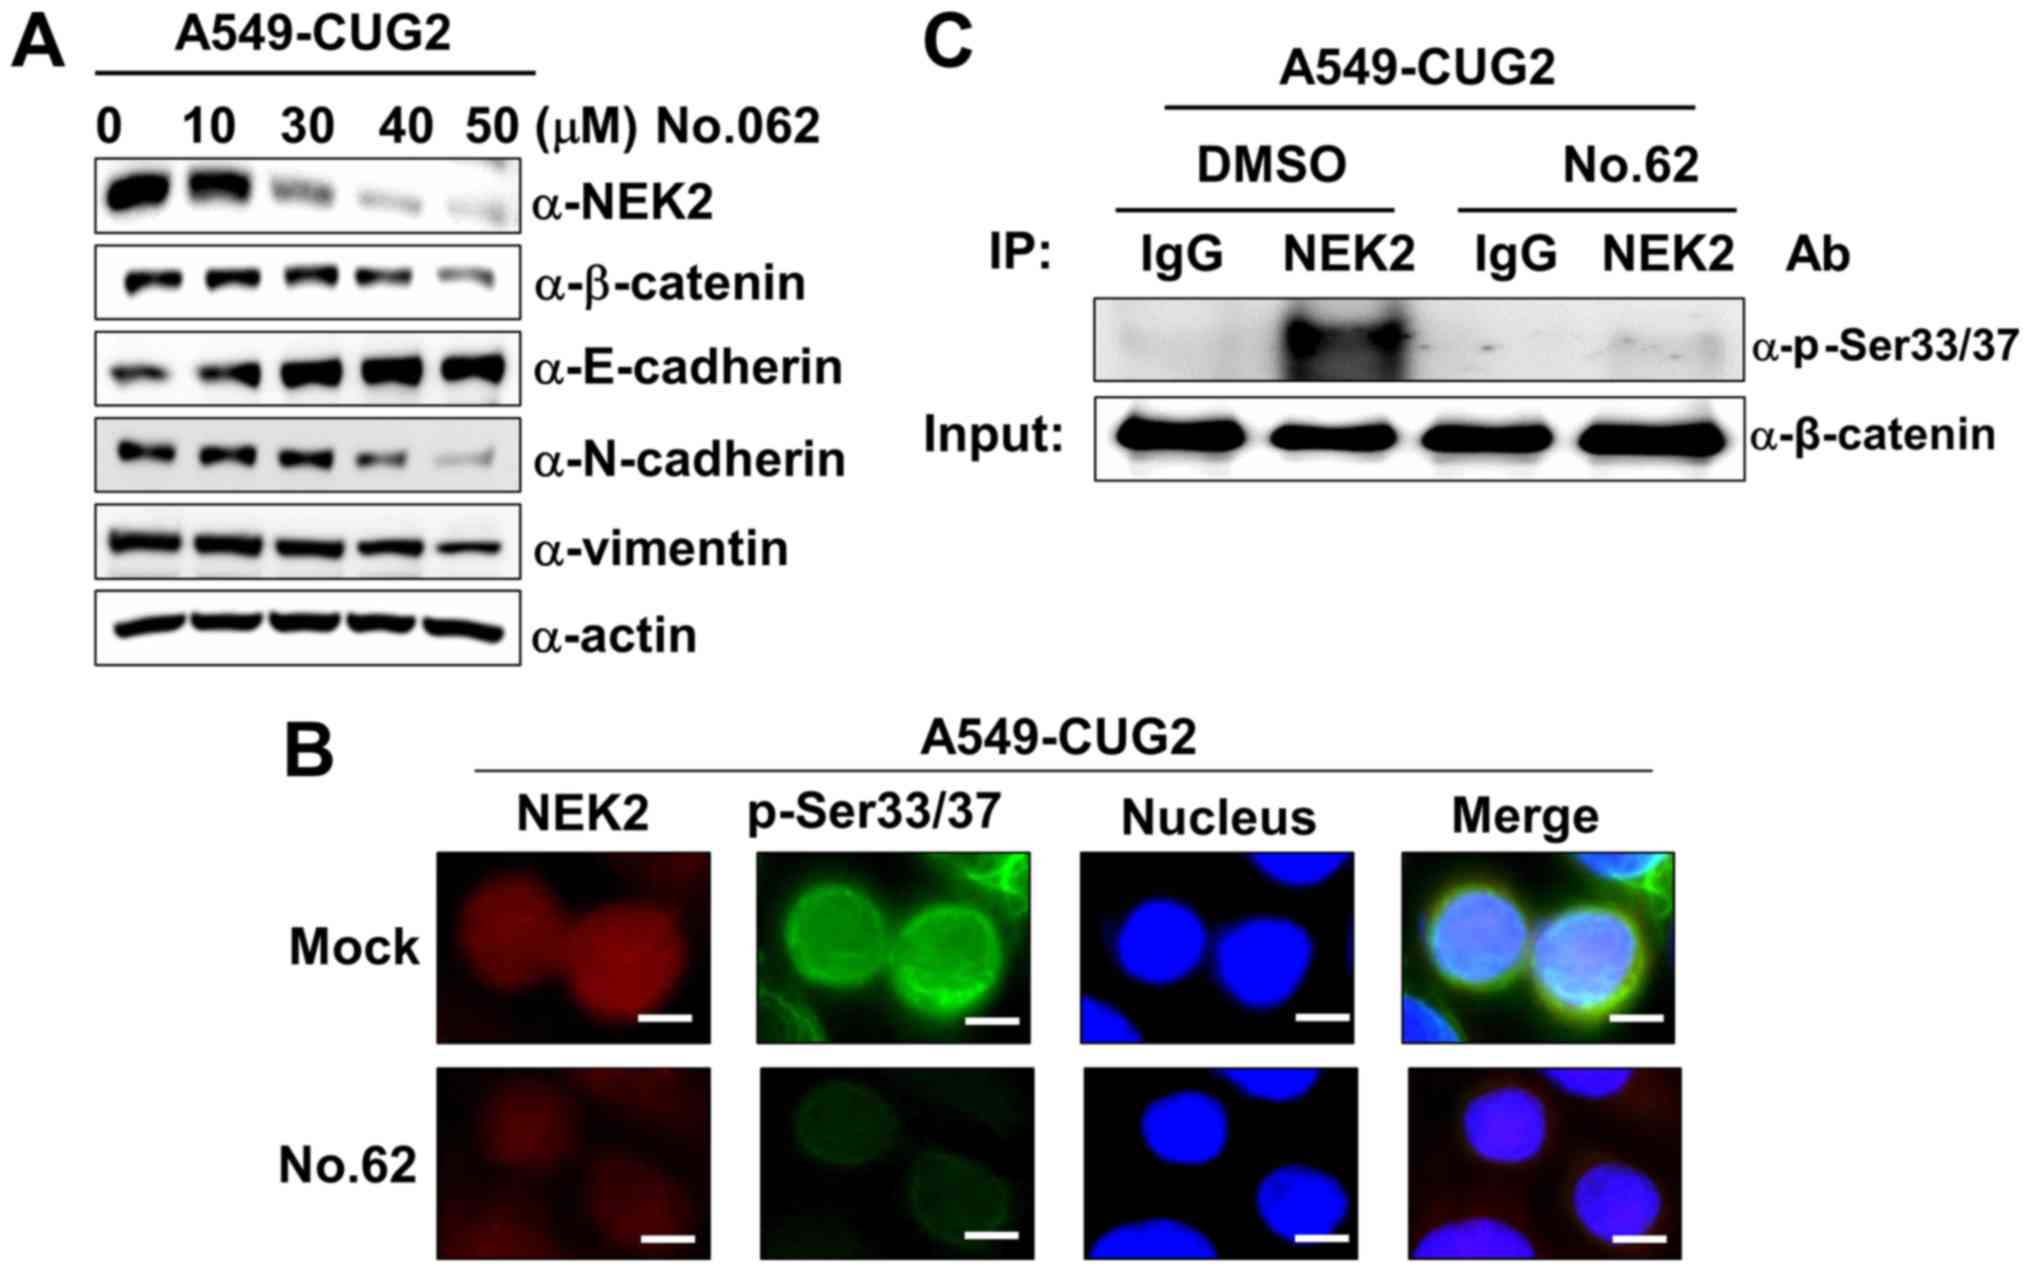 Cgk062 A Small Chemical Molecule Inhibits Cancer Upregulated Gene 2 Induced Oncogenesis Through Nek2 And B Catenin